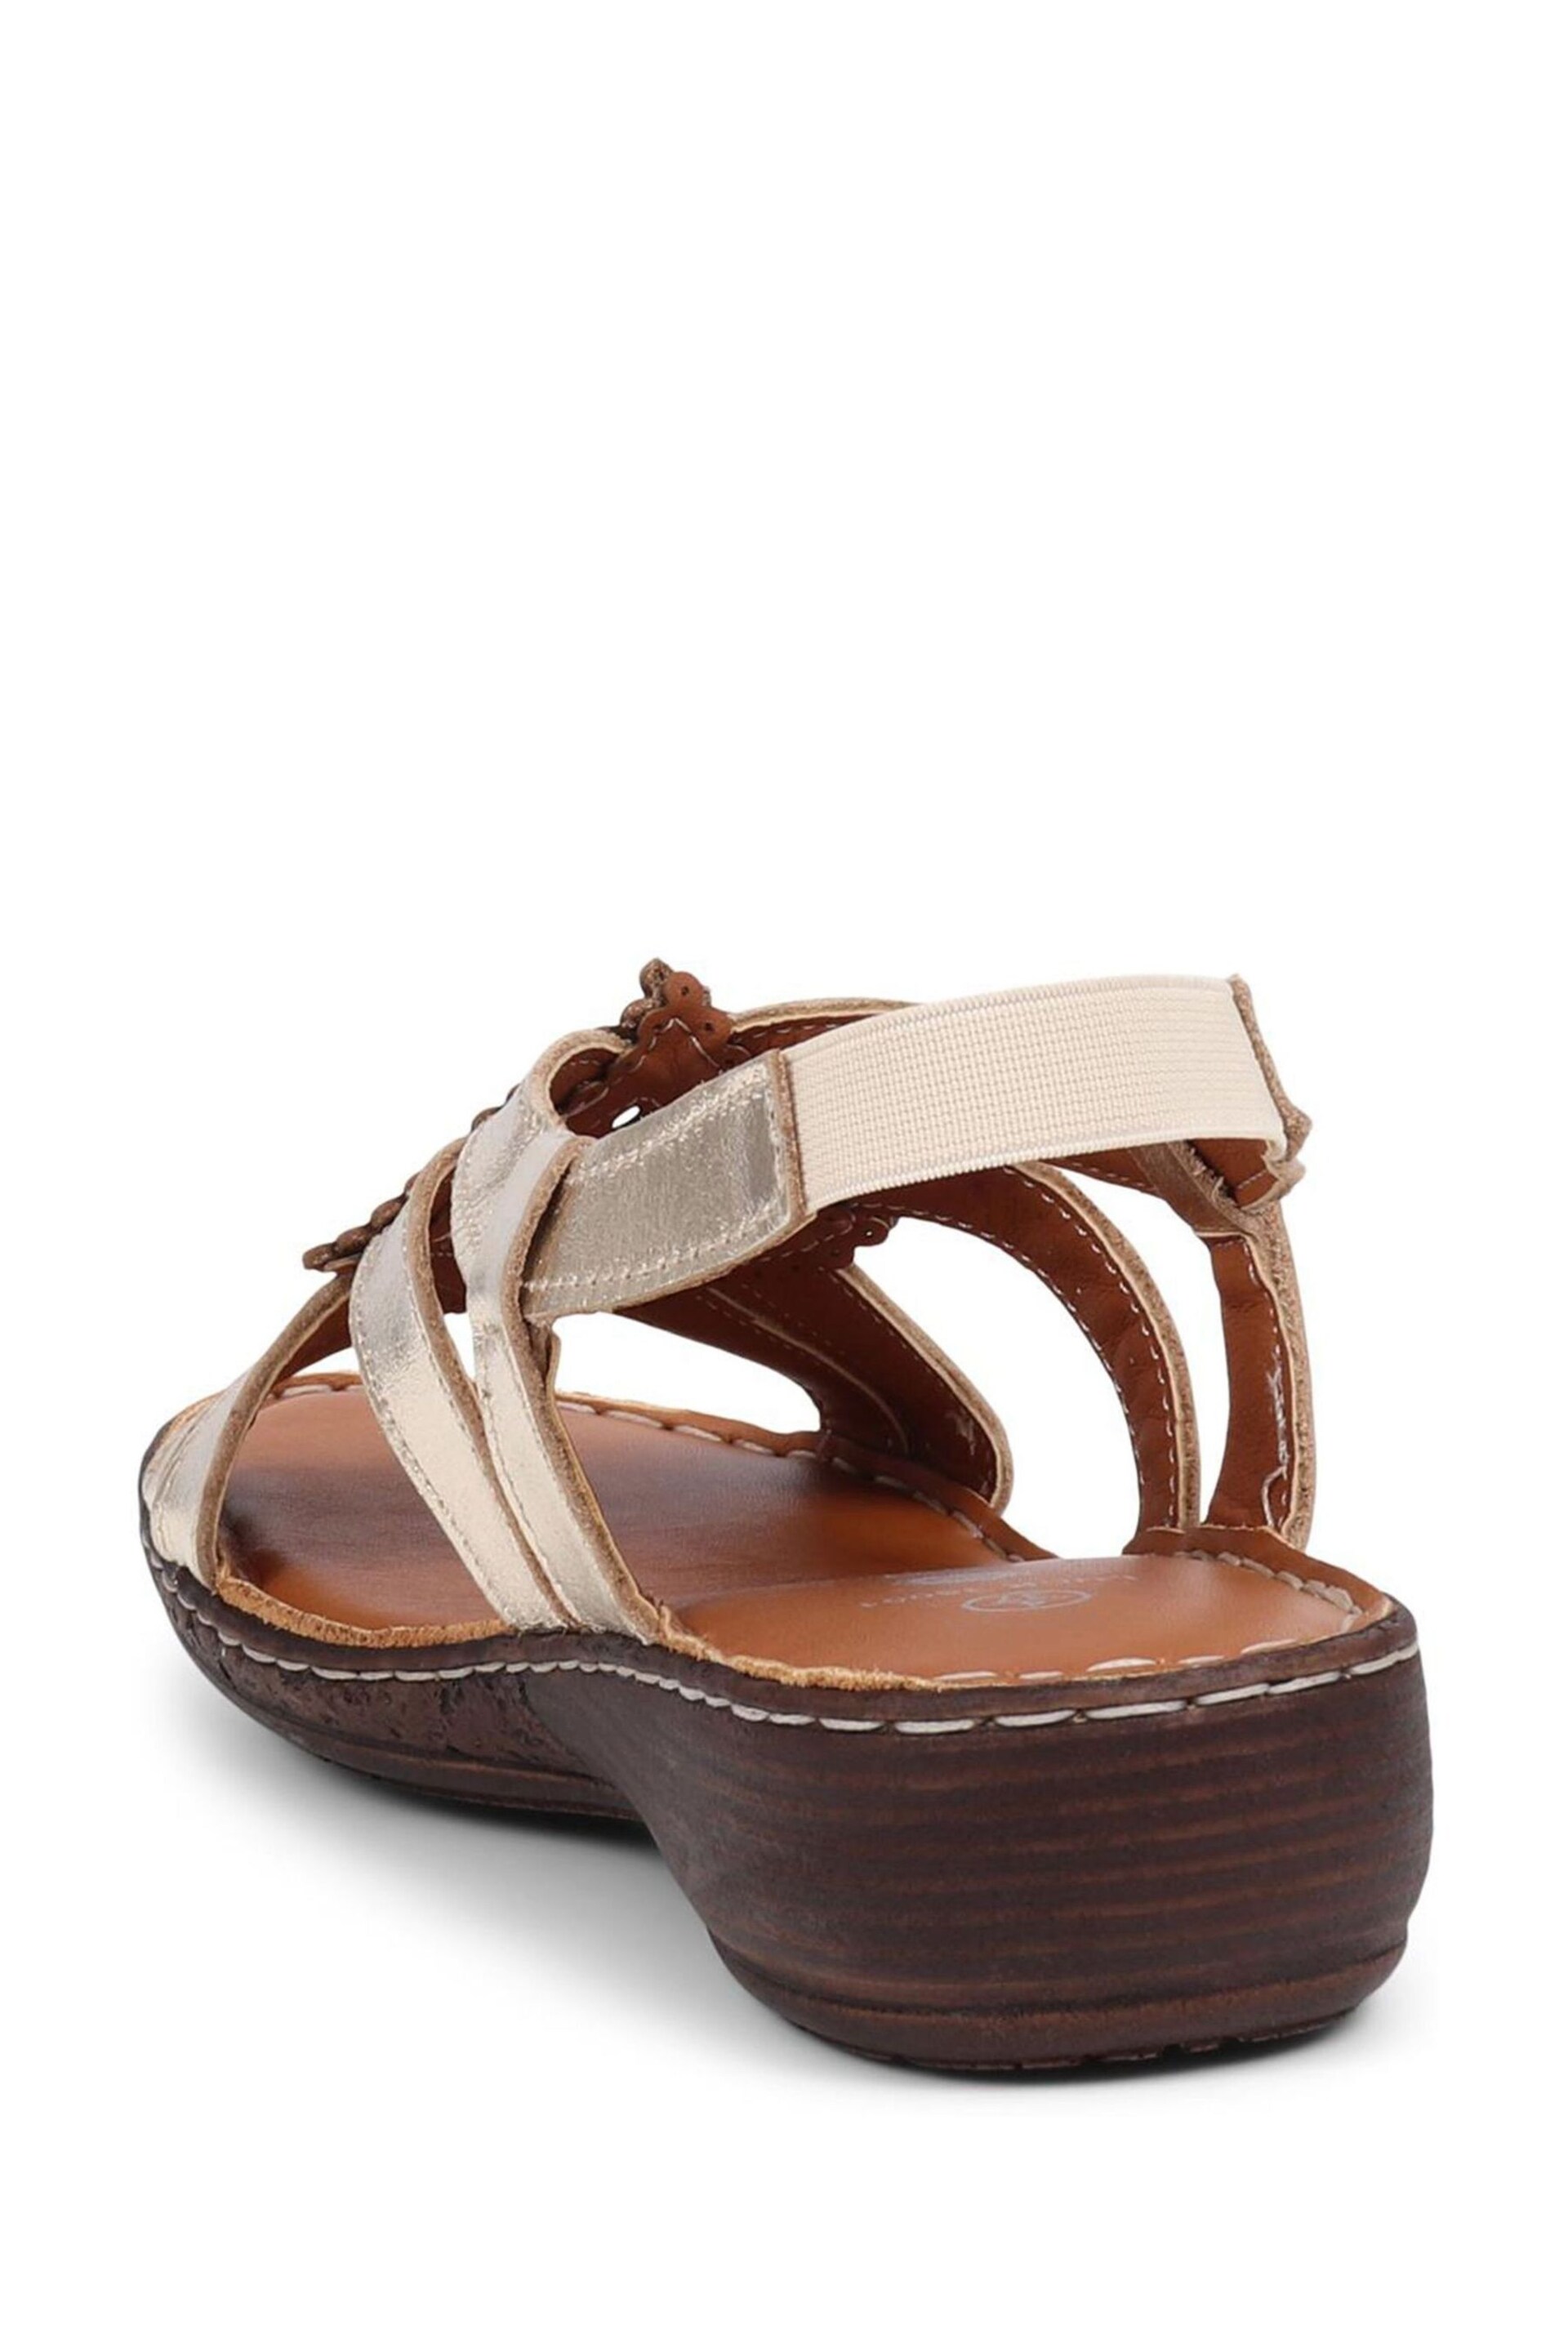 Pavers Leather Slingback Sandals - Image 2 of 5